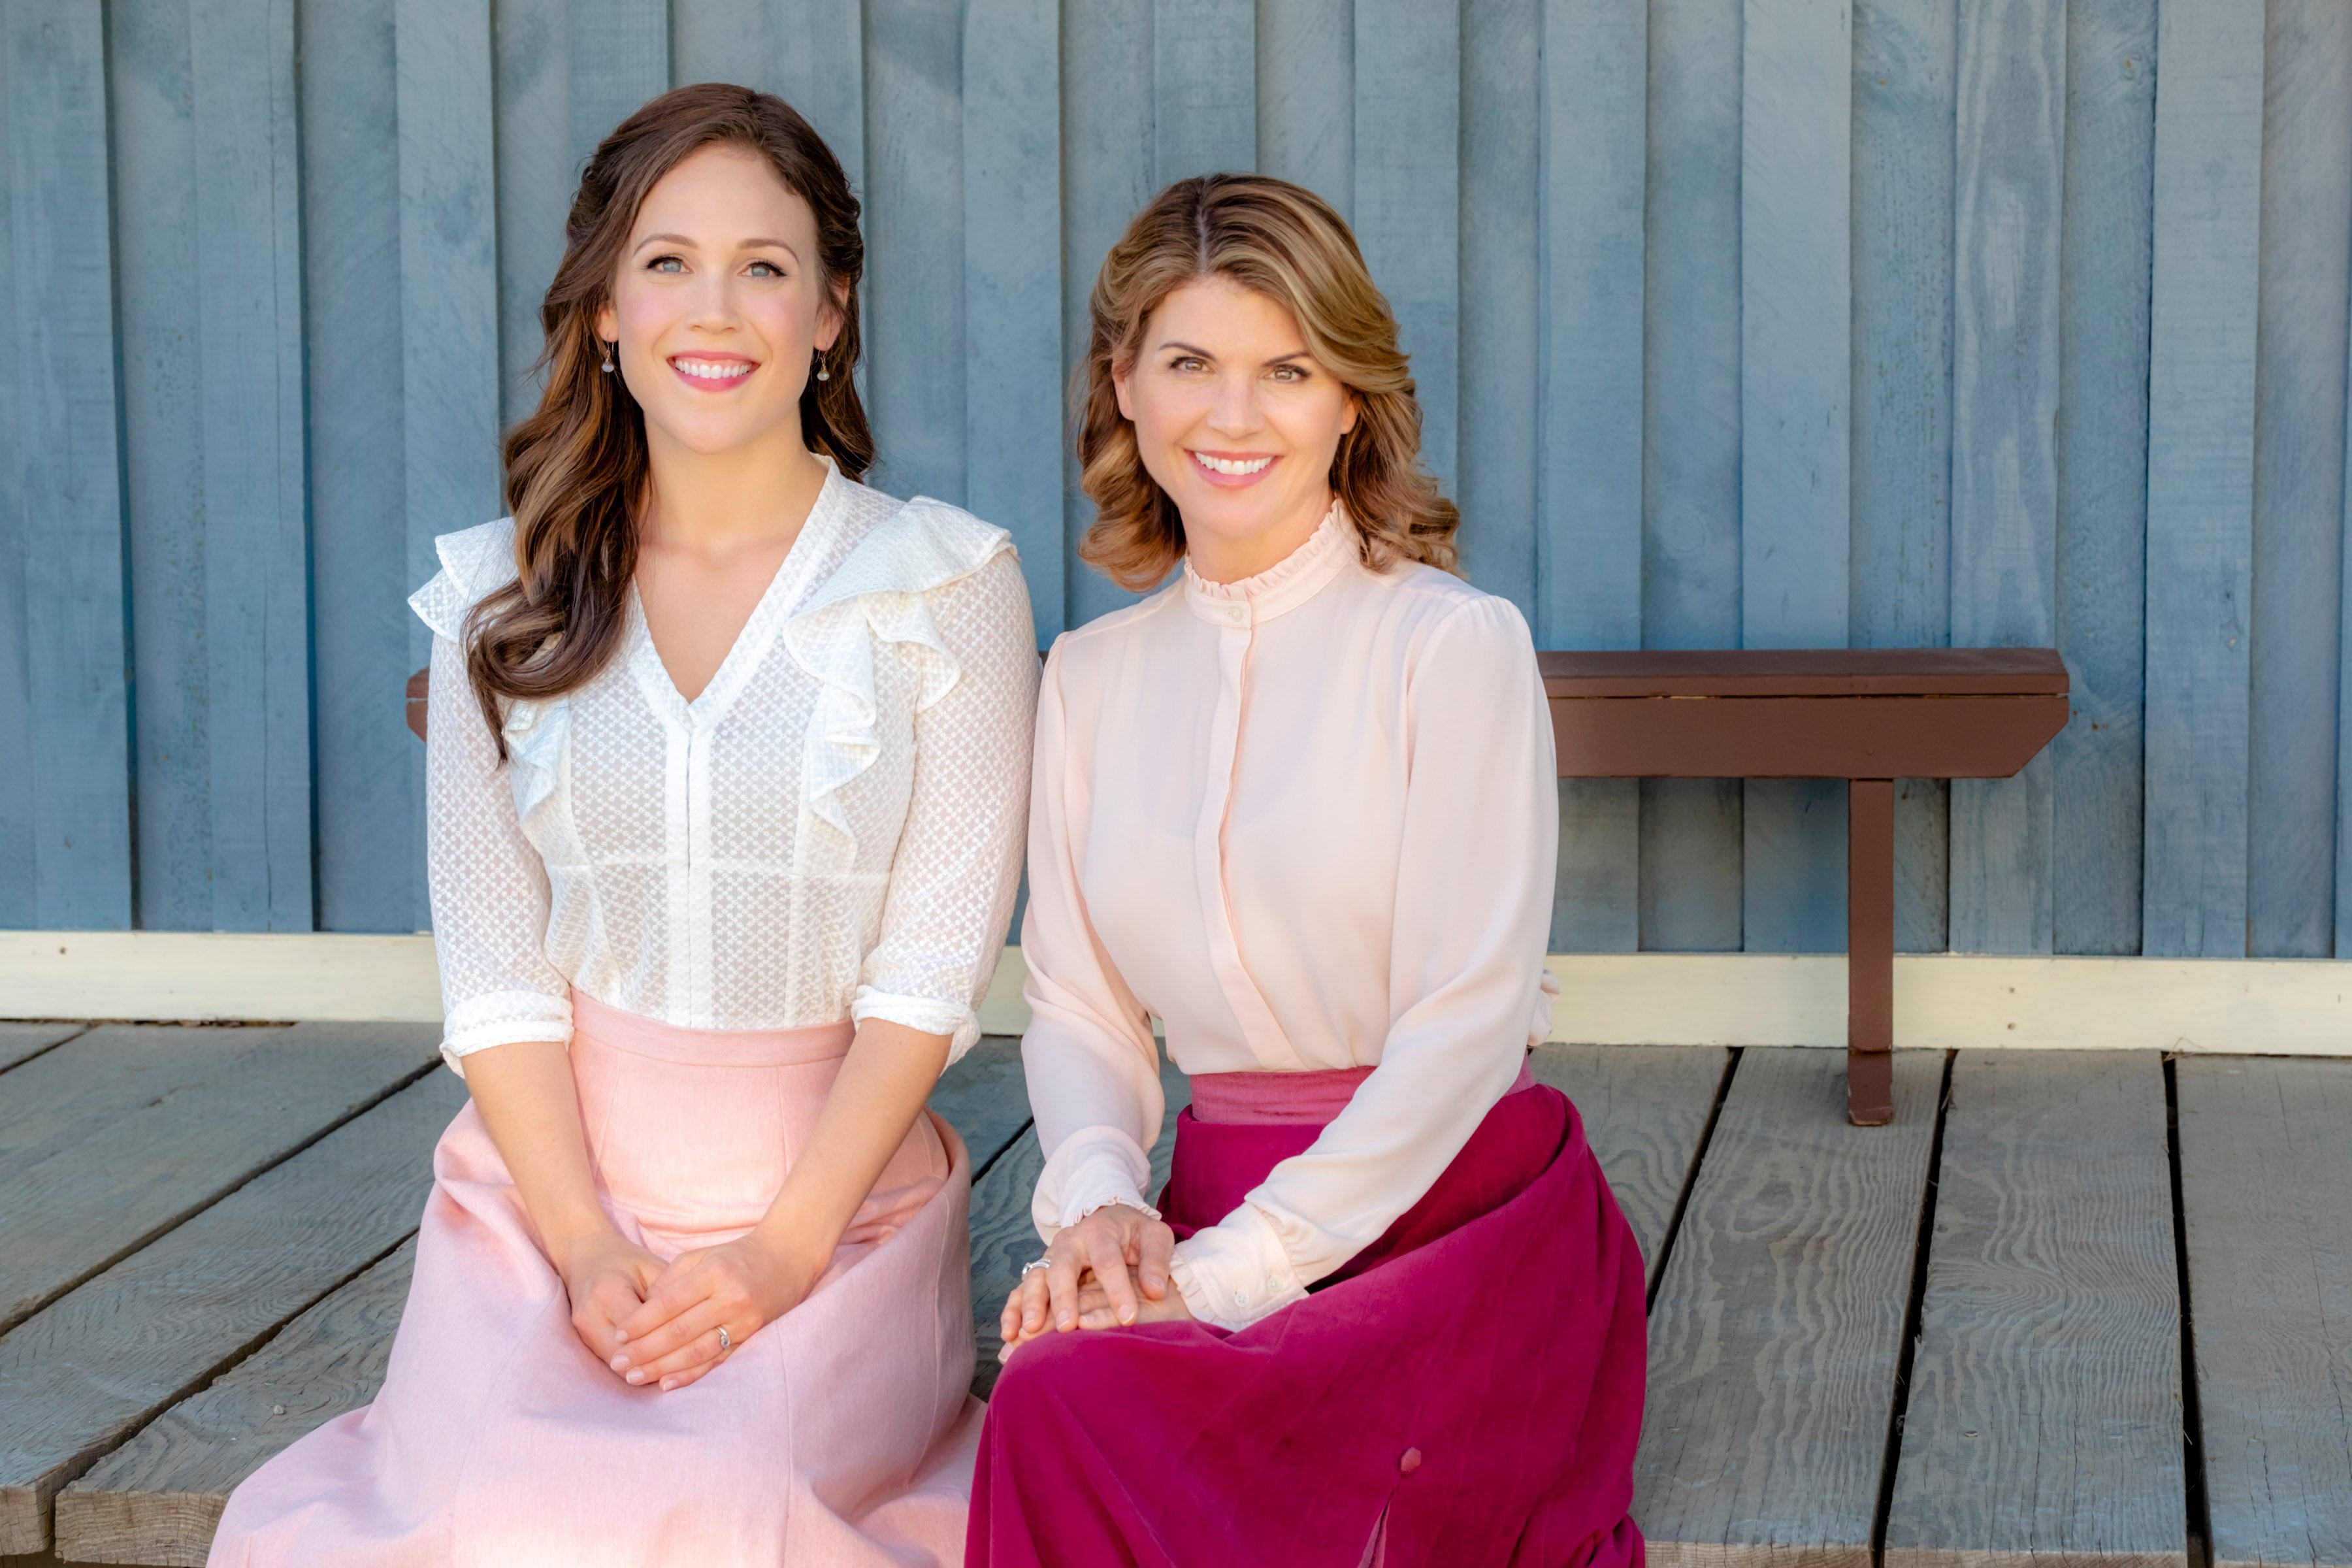 Erin Krakow and Lori Loughlin sitting next to each other on a wooden sidewalk in 'When Calls the Heart' 